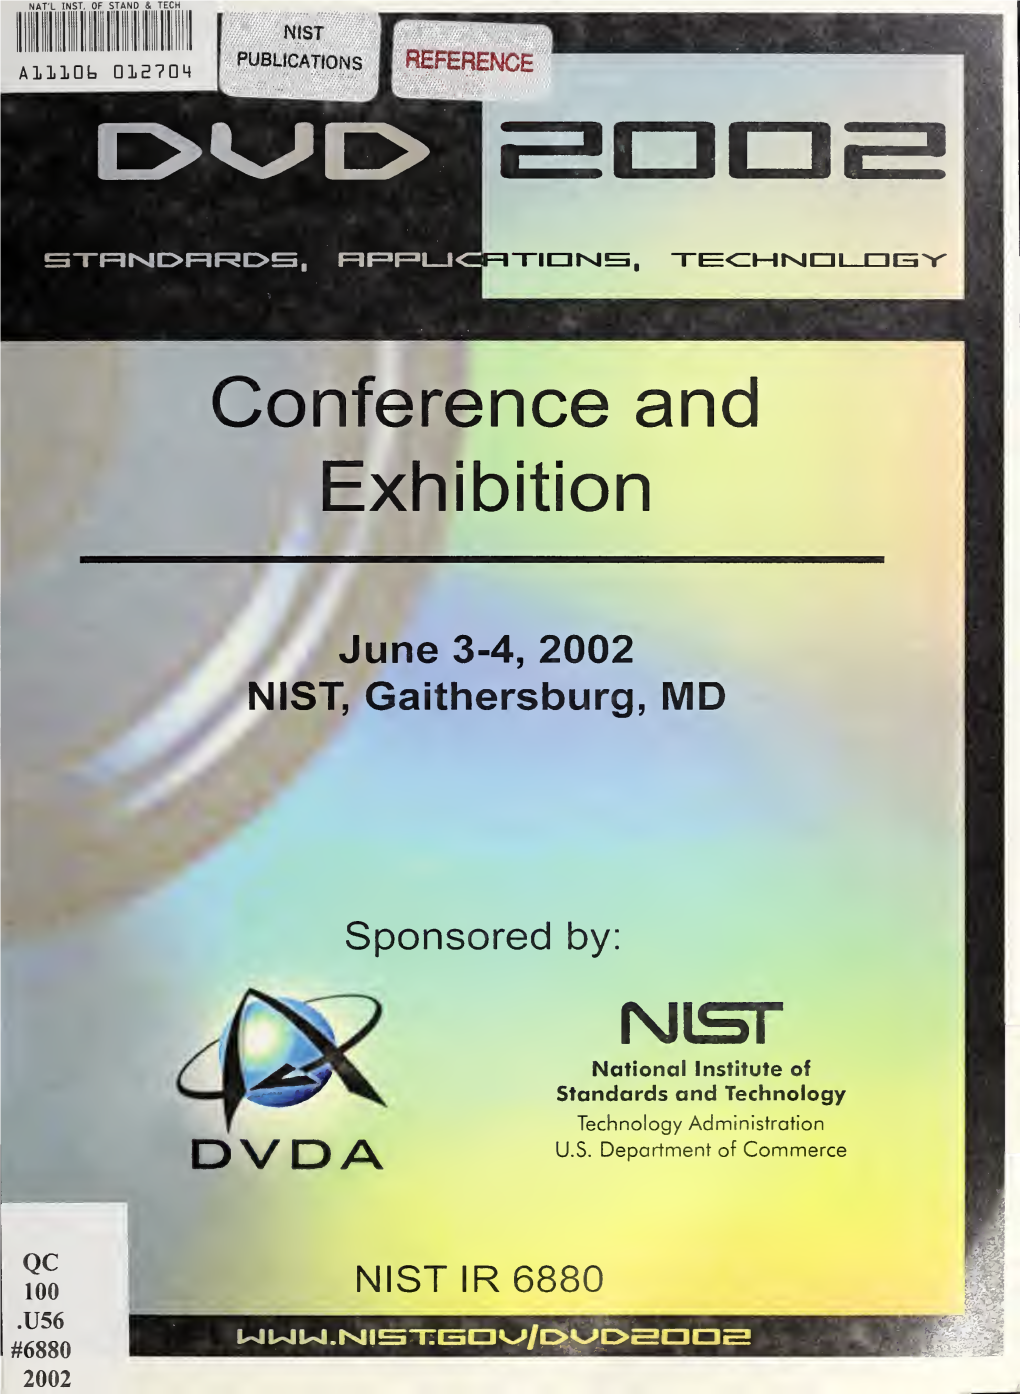 DVD 2002: Standards, Applications, Technology Conference & Exhibition